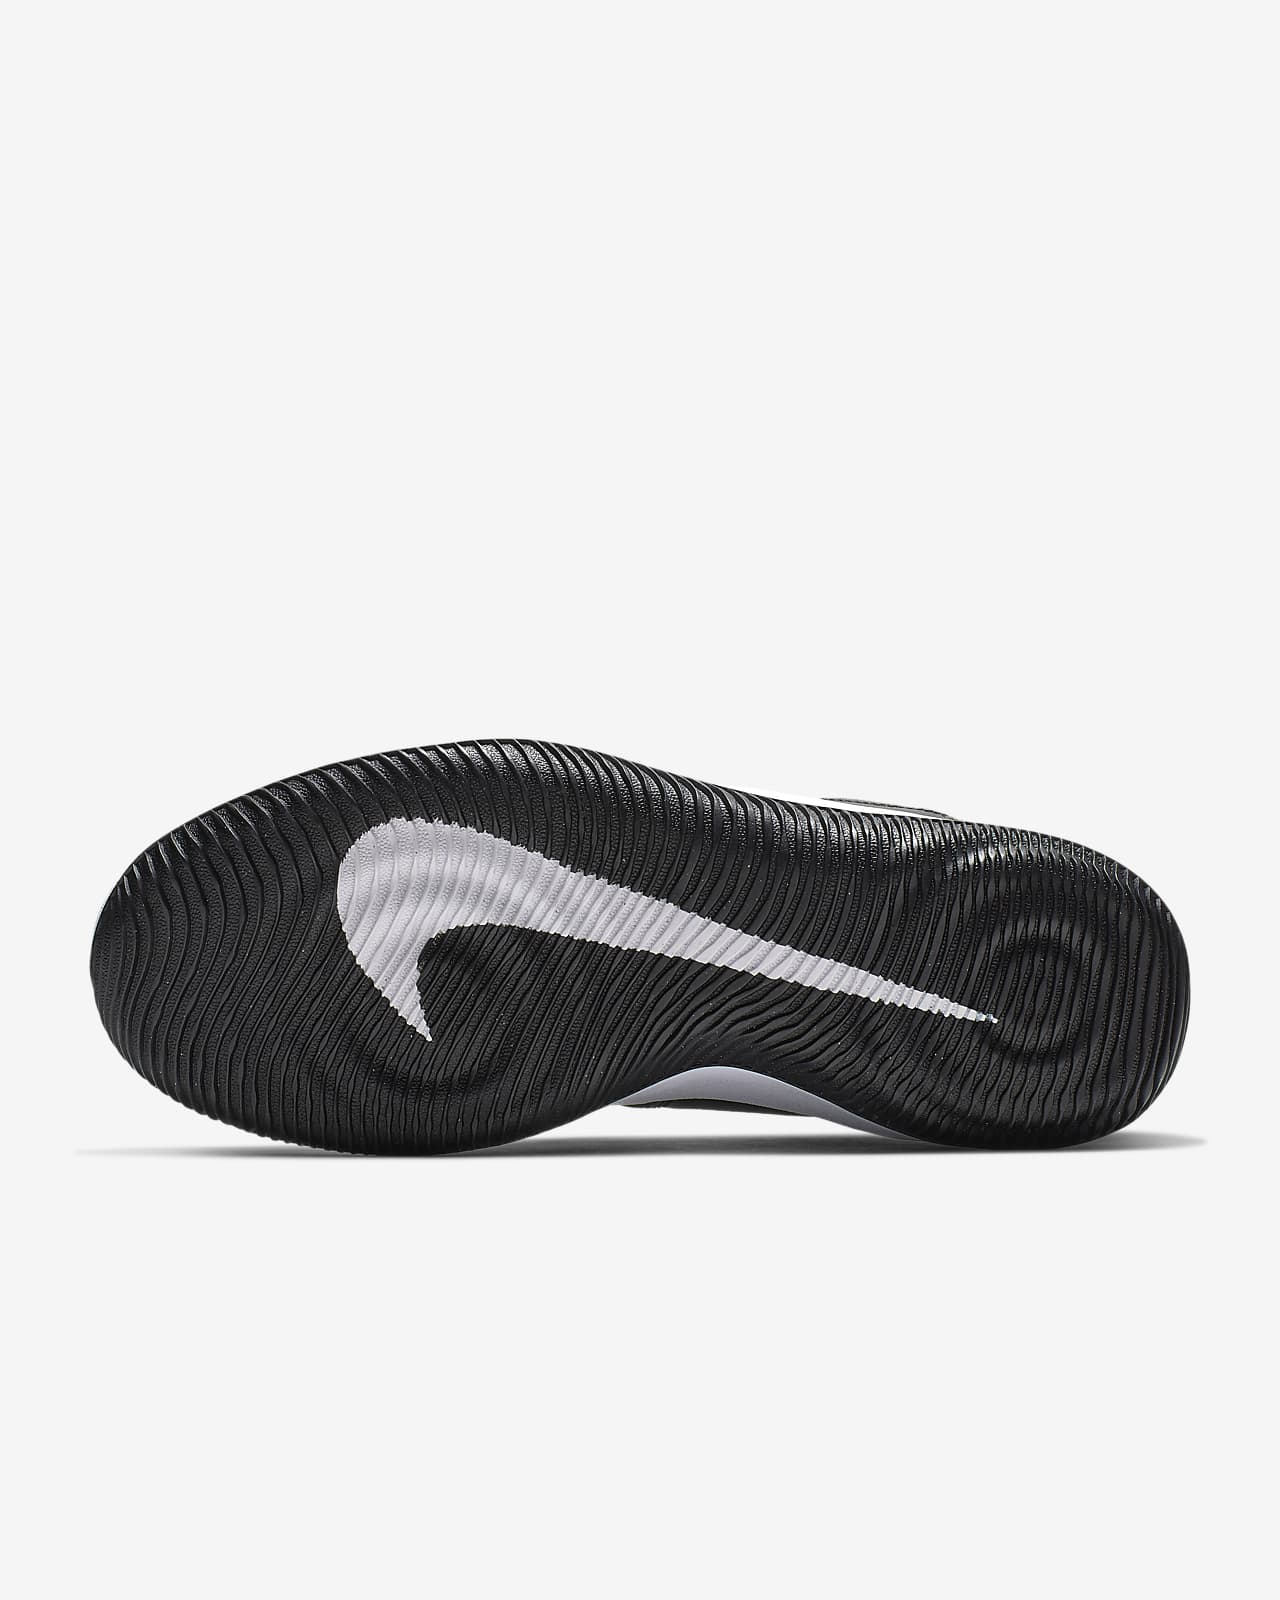 nike flyby low basketball shoes review